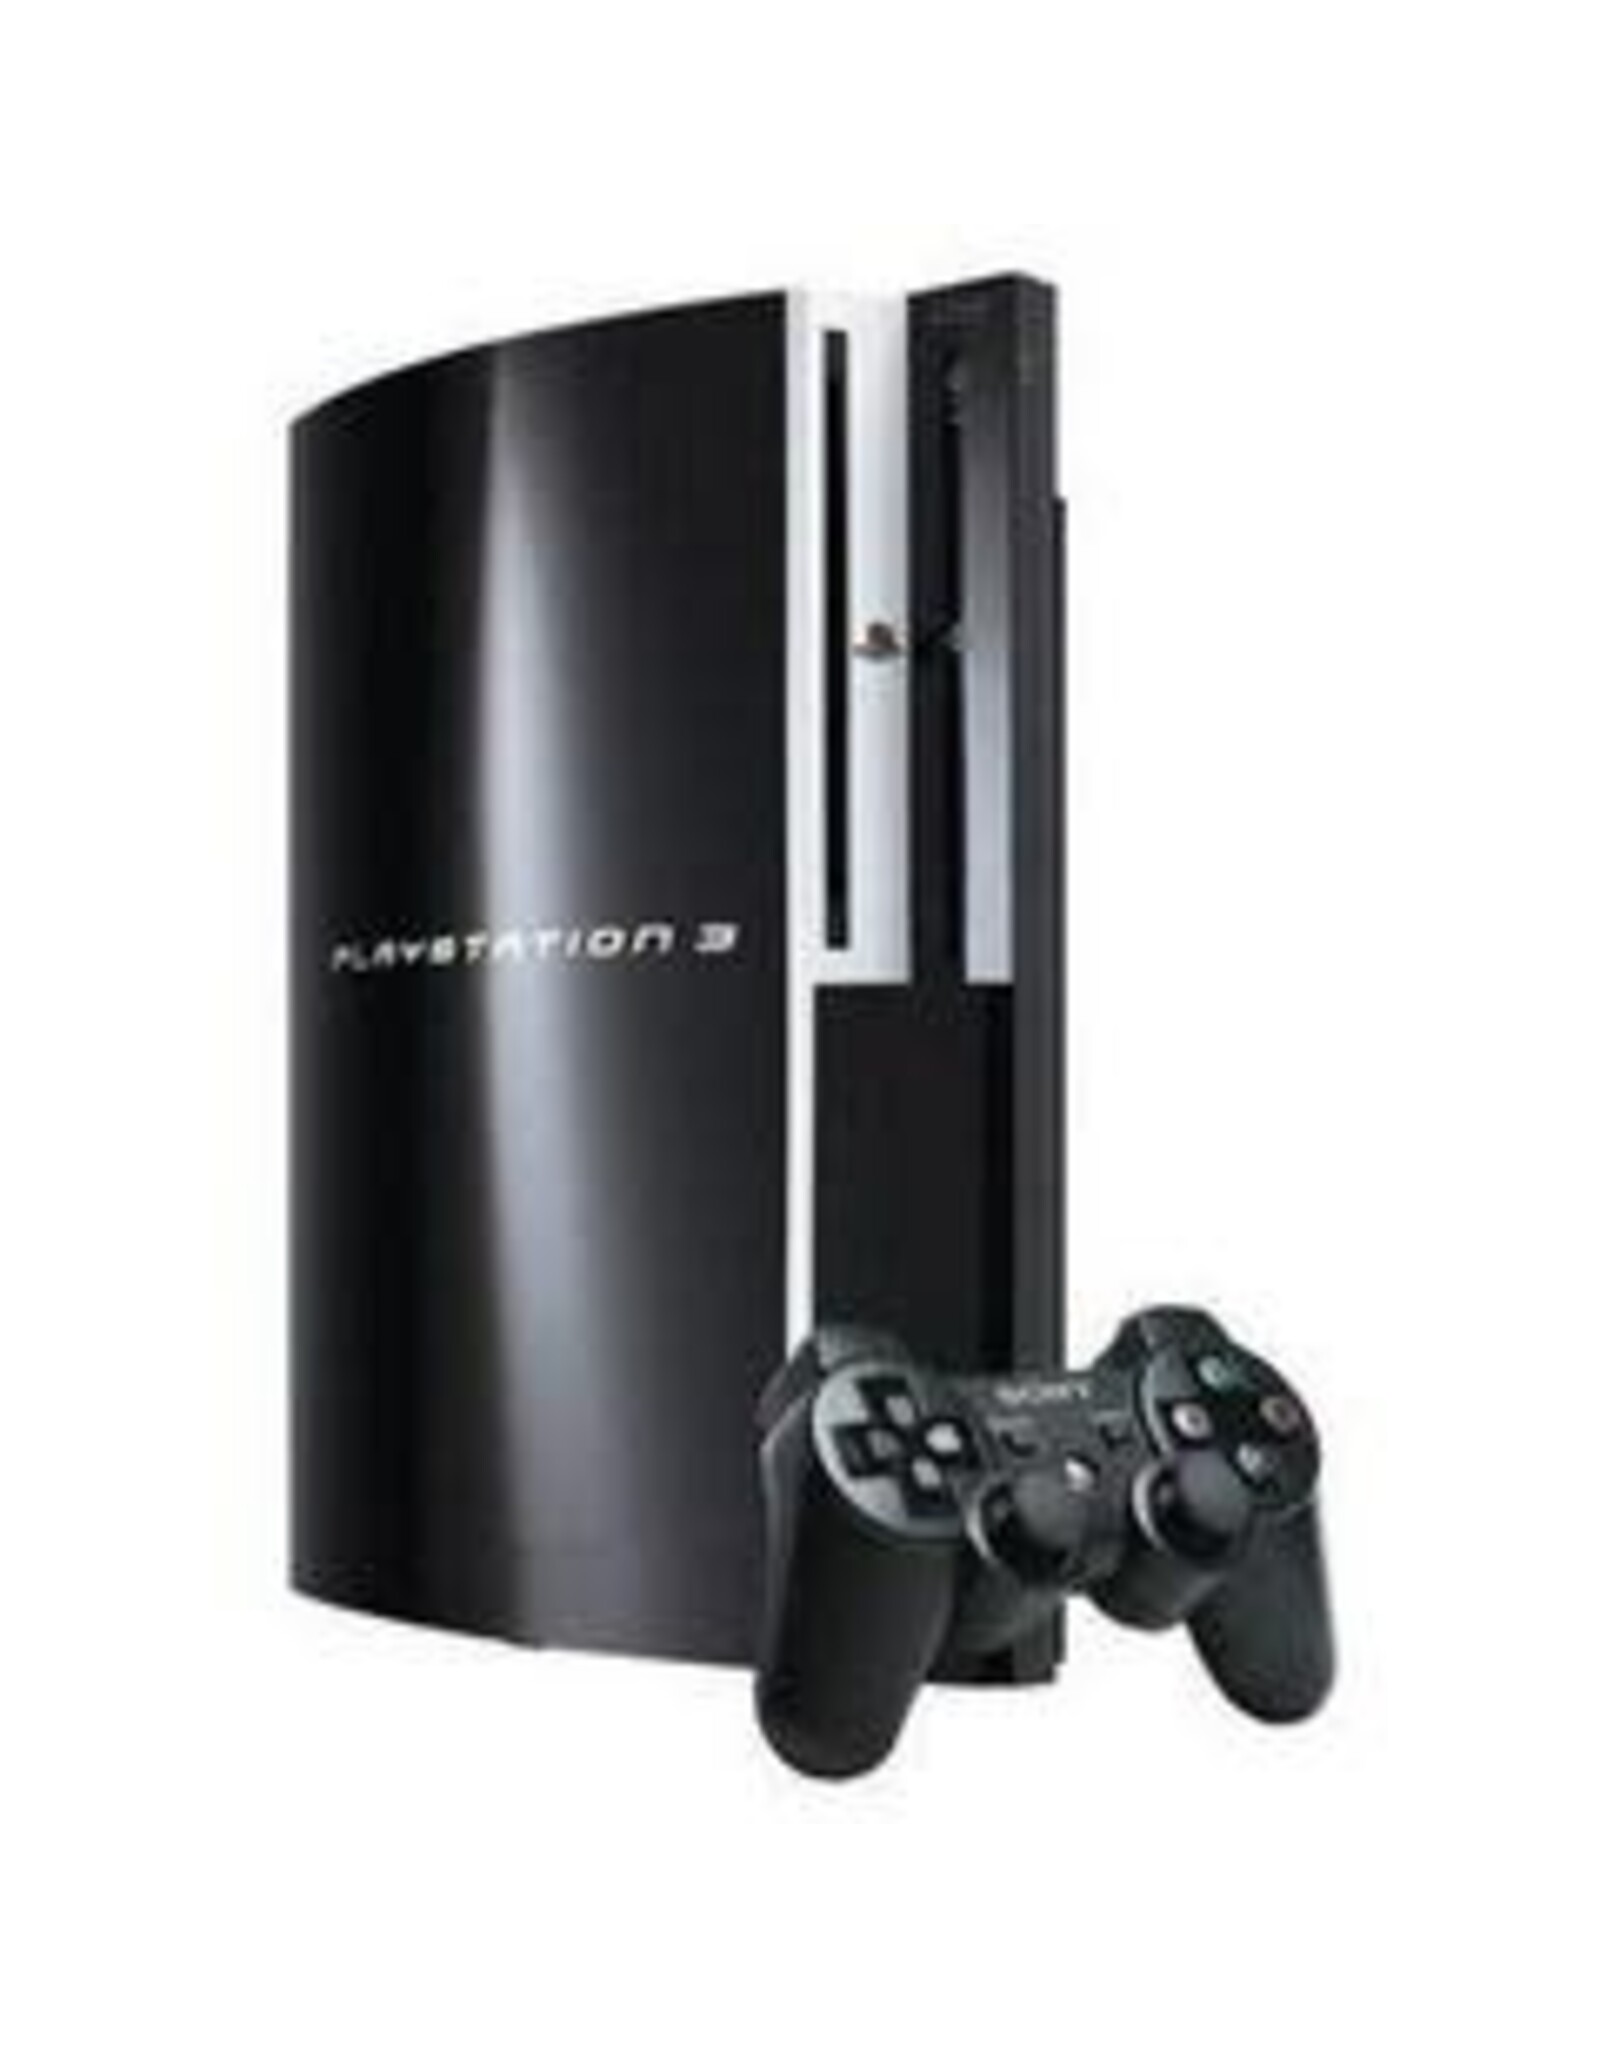 Playstation 3 PS3 Playstation 3 Console 80GB - Backwards Compatible (Used)